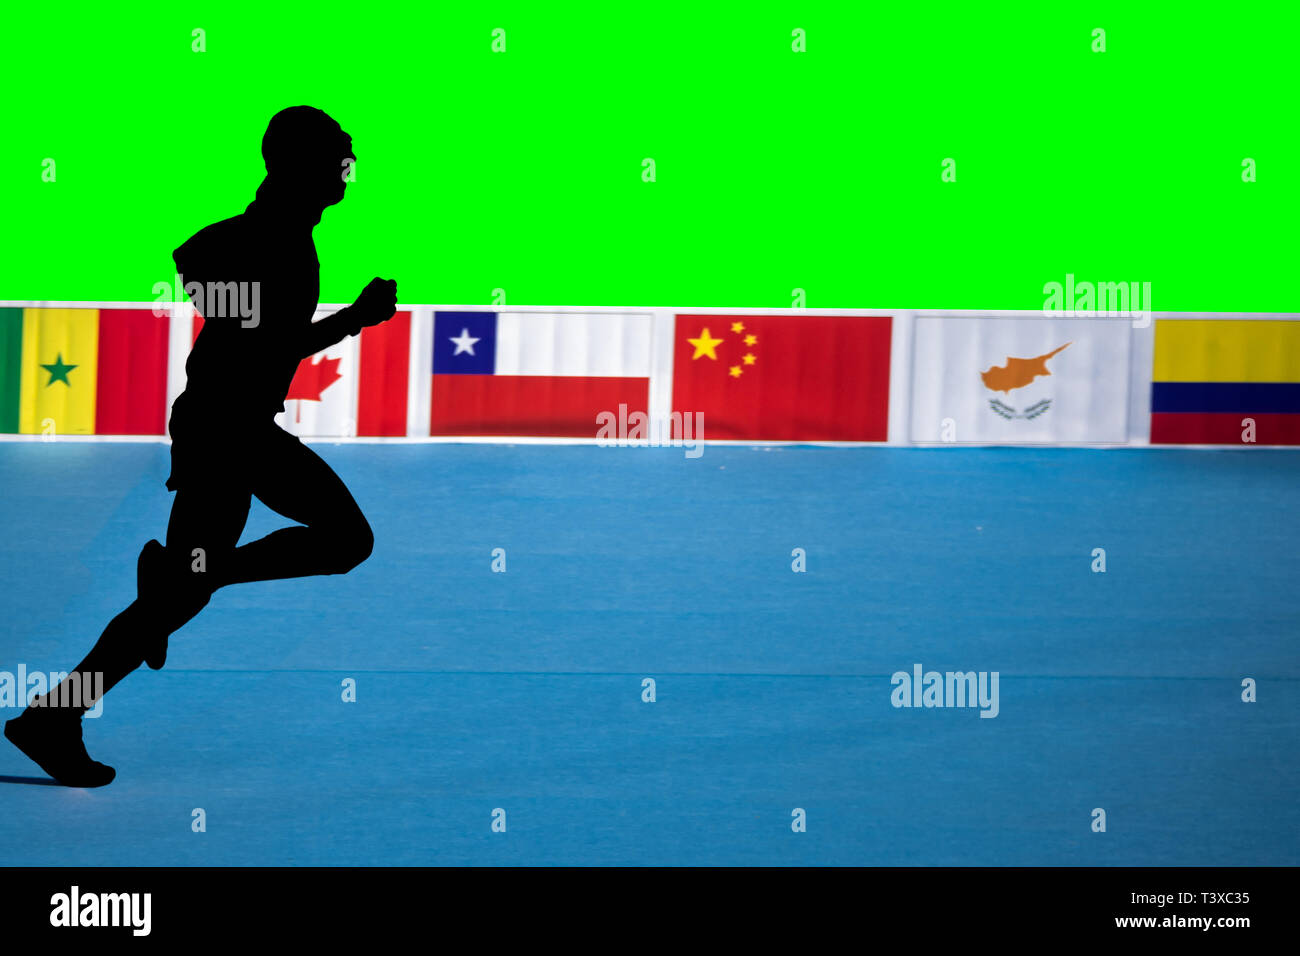 Fast marathon runner silhouette with green background and flags Stock Photo